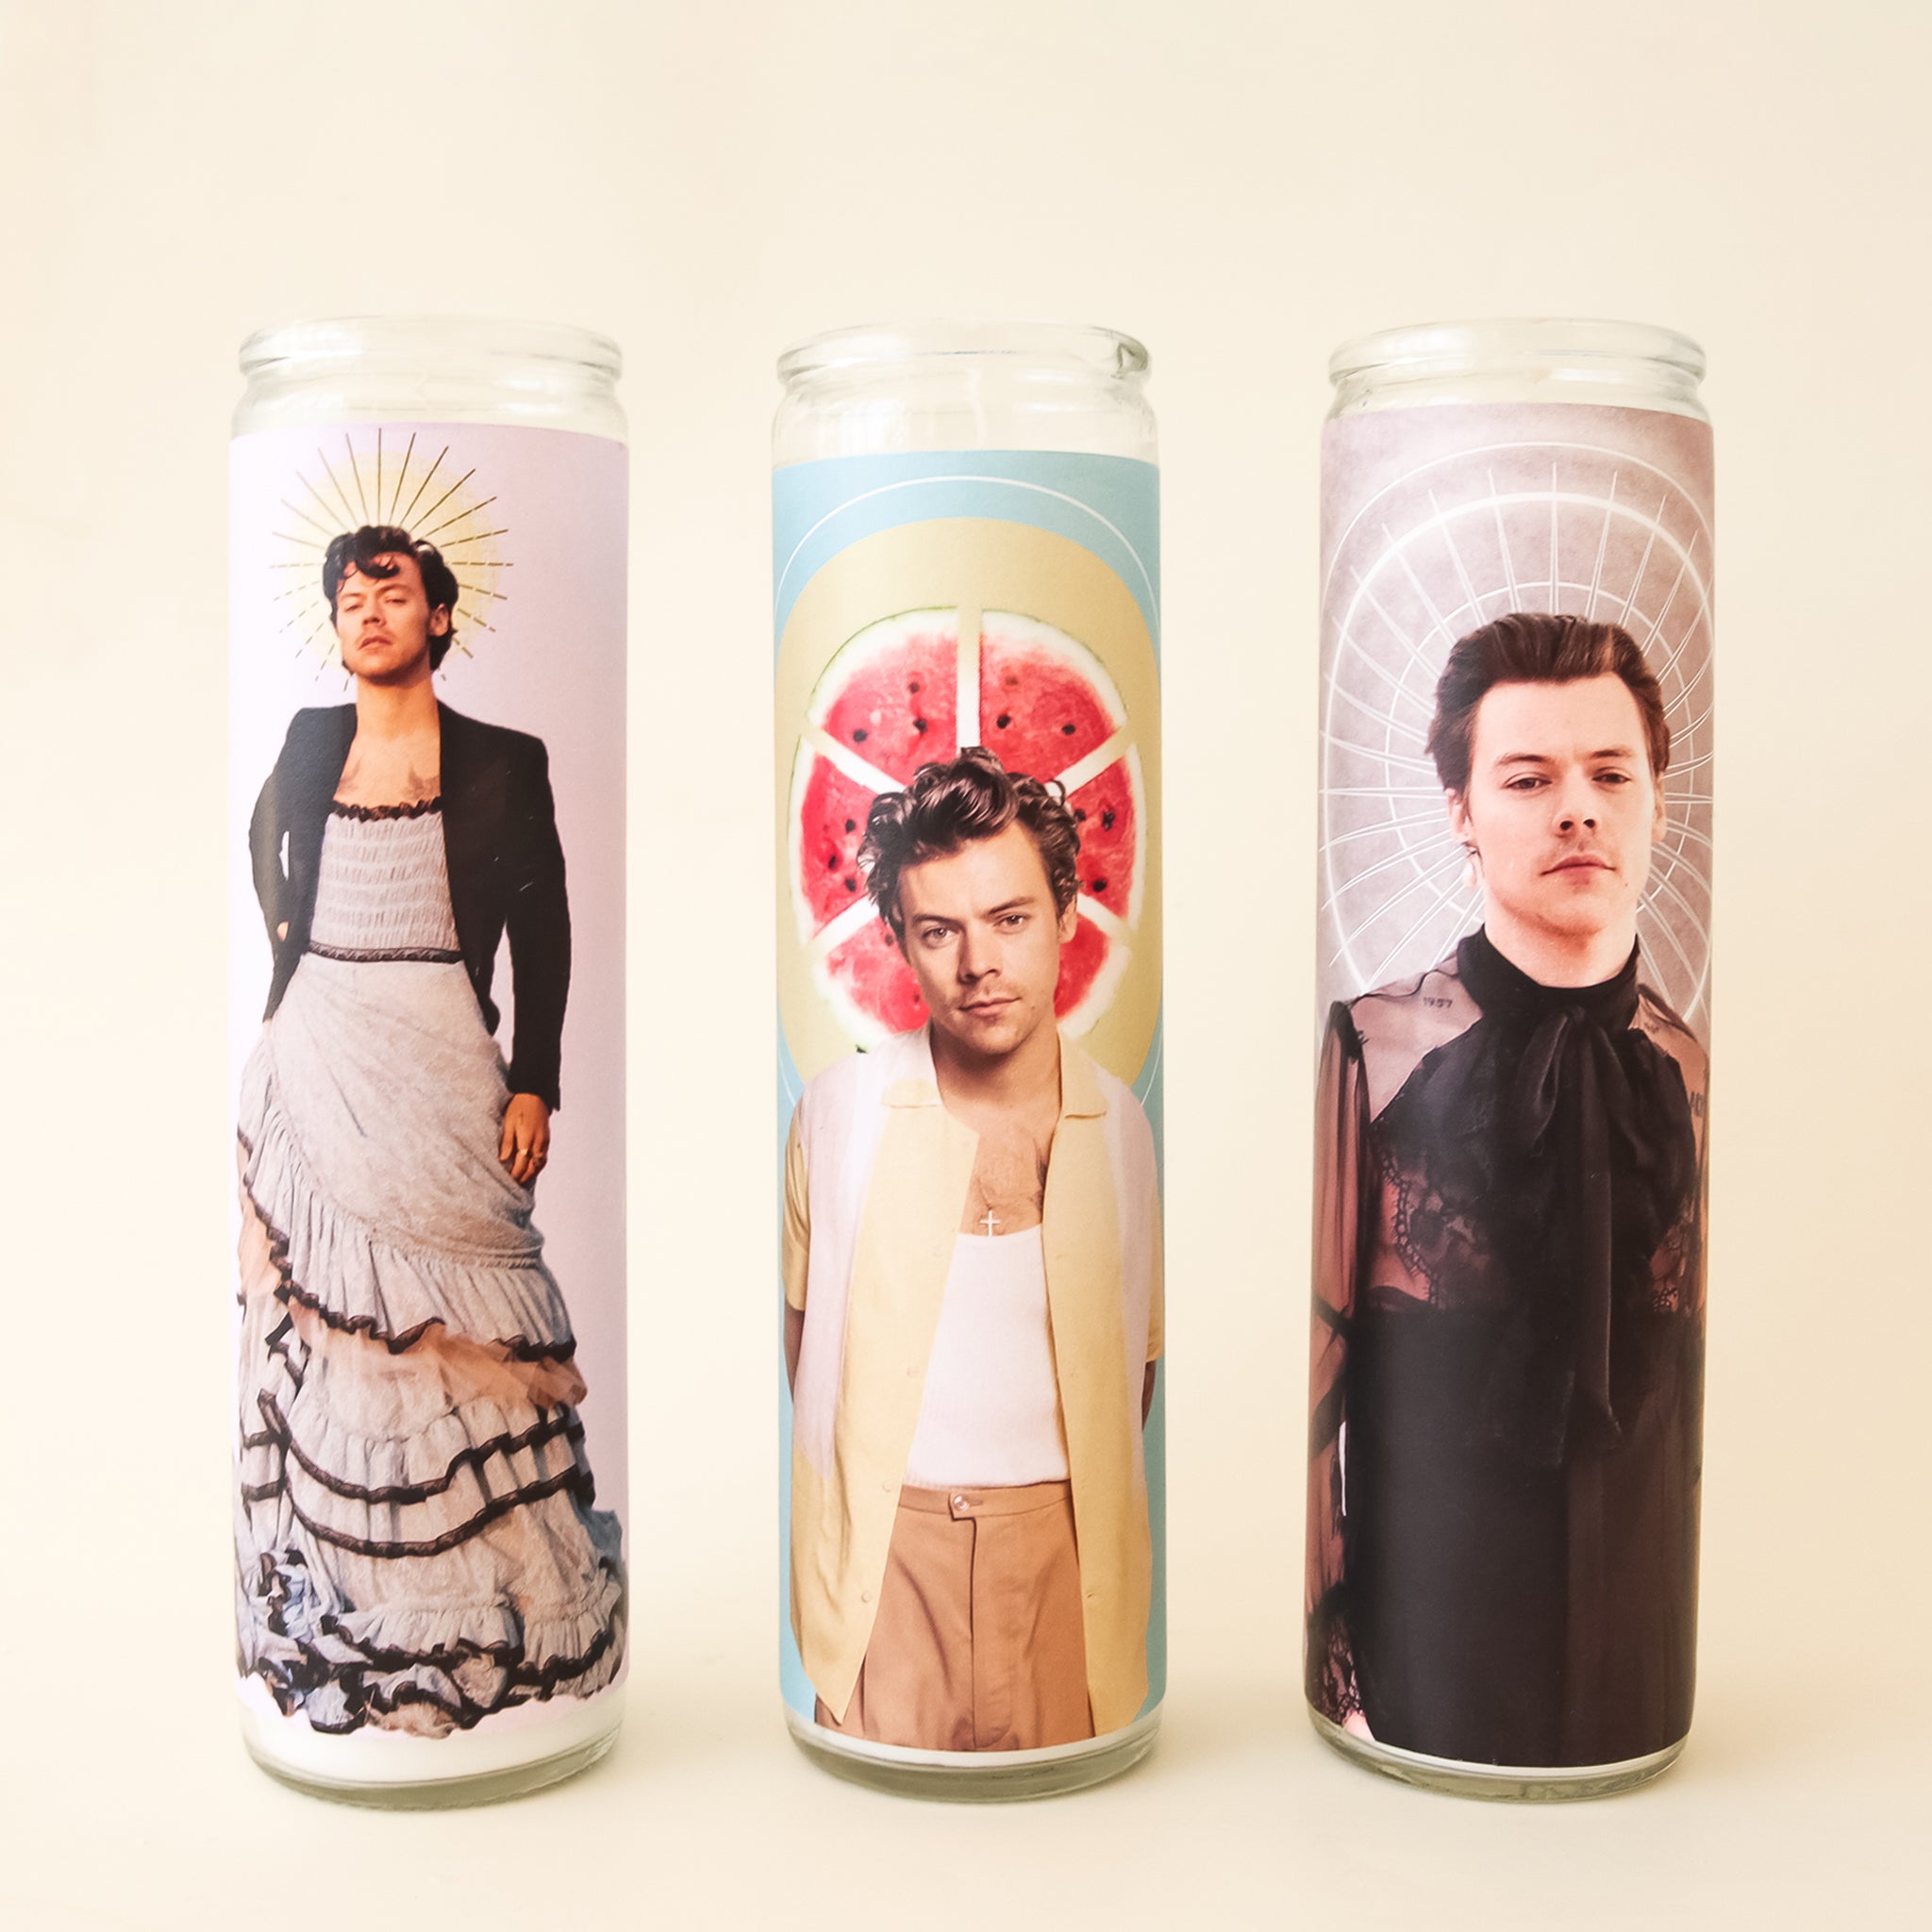 On a white background is a prayer candle with a photo of Harry Styles in front of a watermelon photographed next to other available Harry Styles prayer candles on our site.